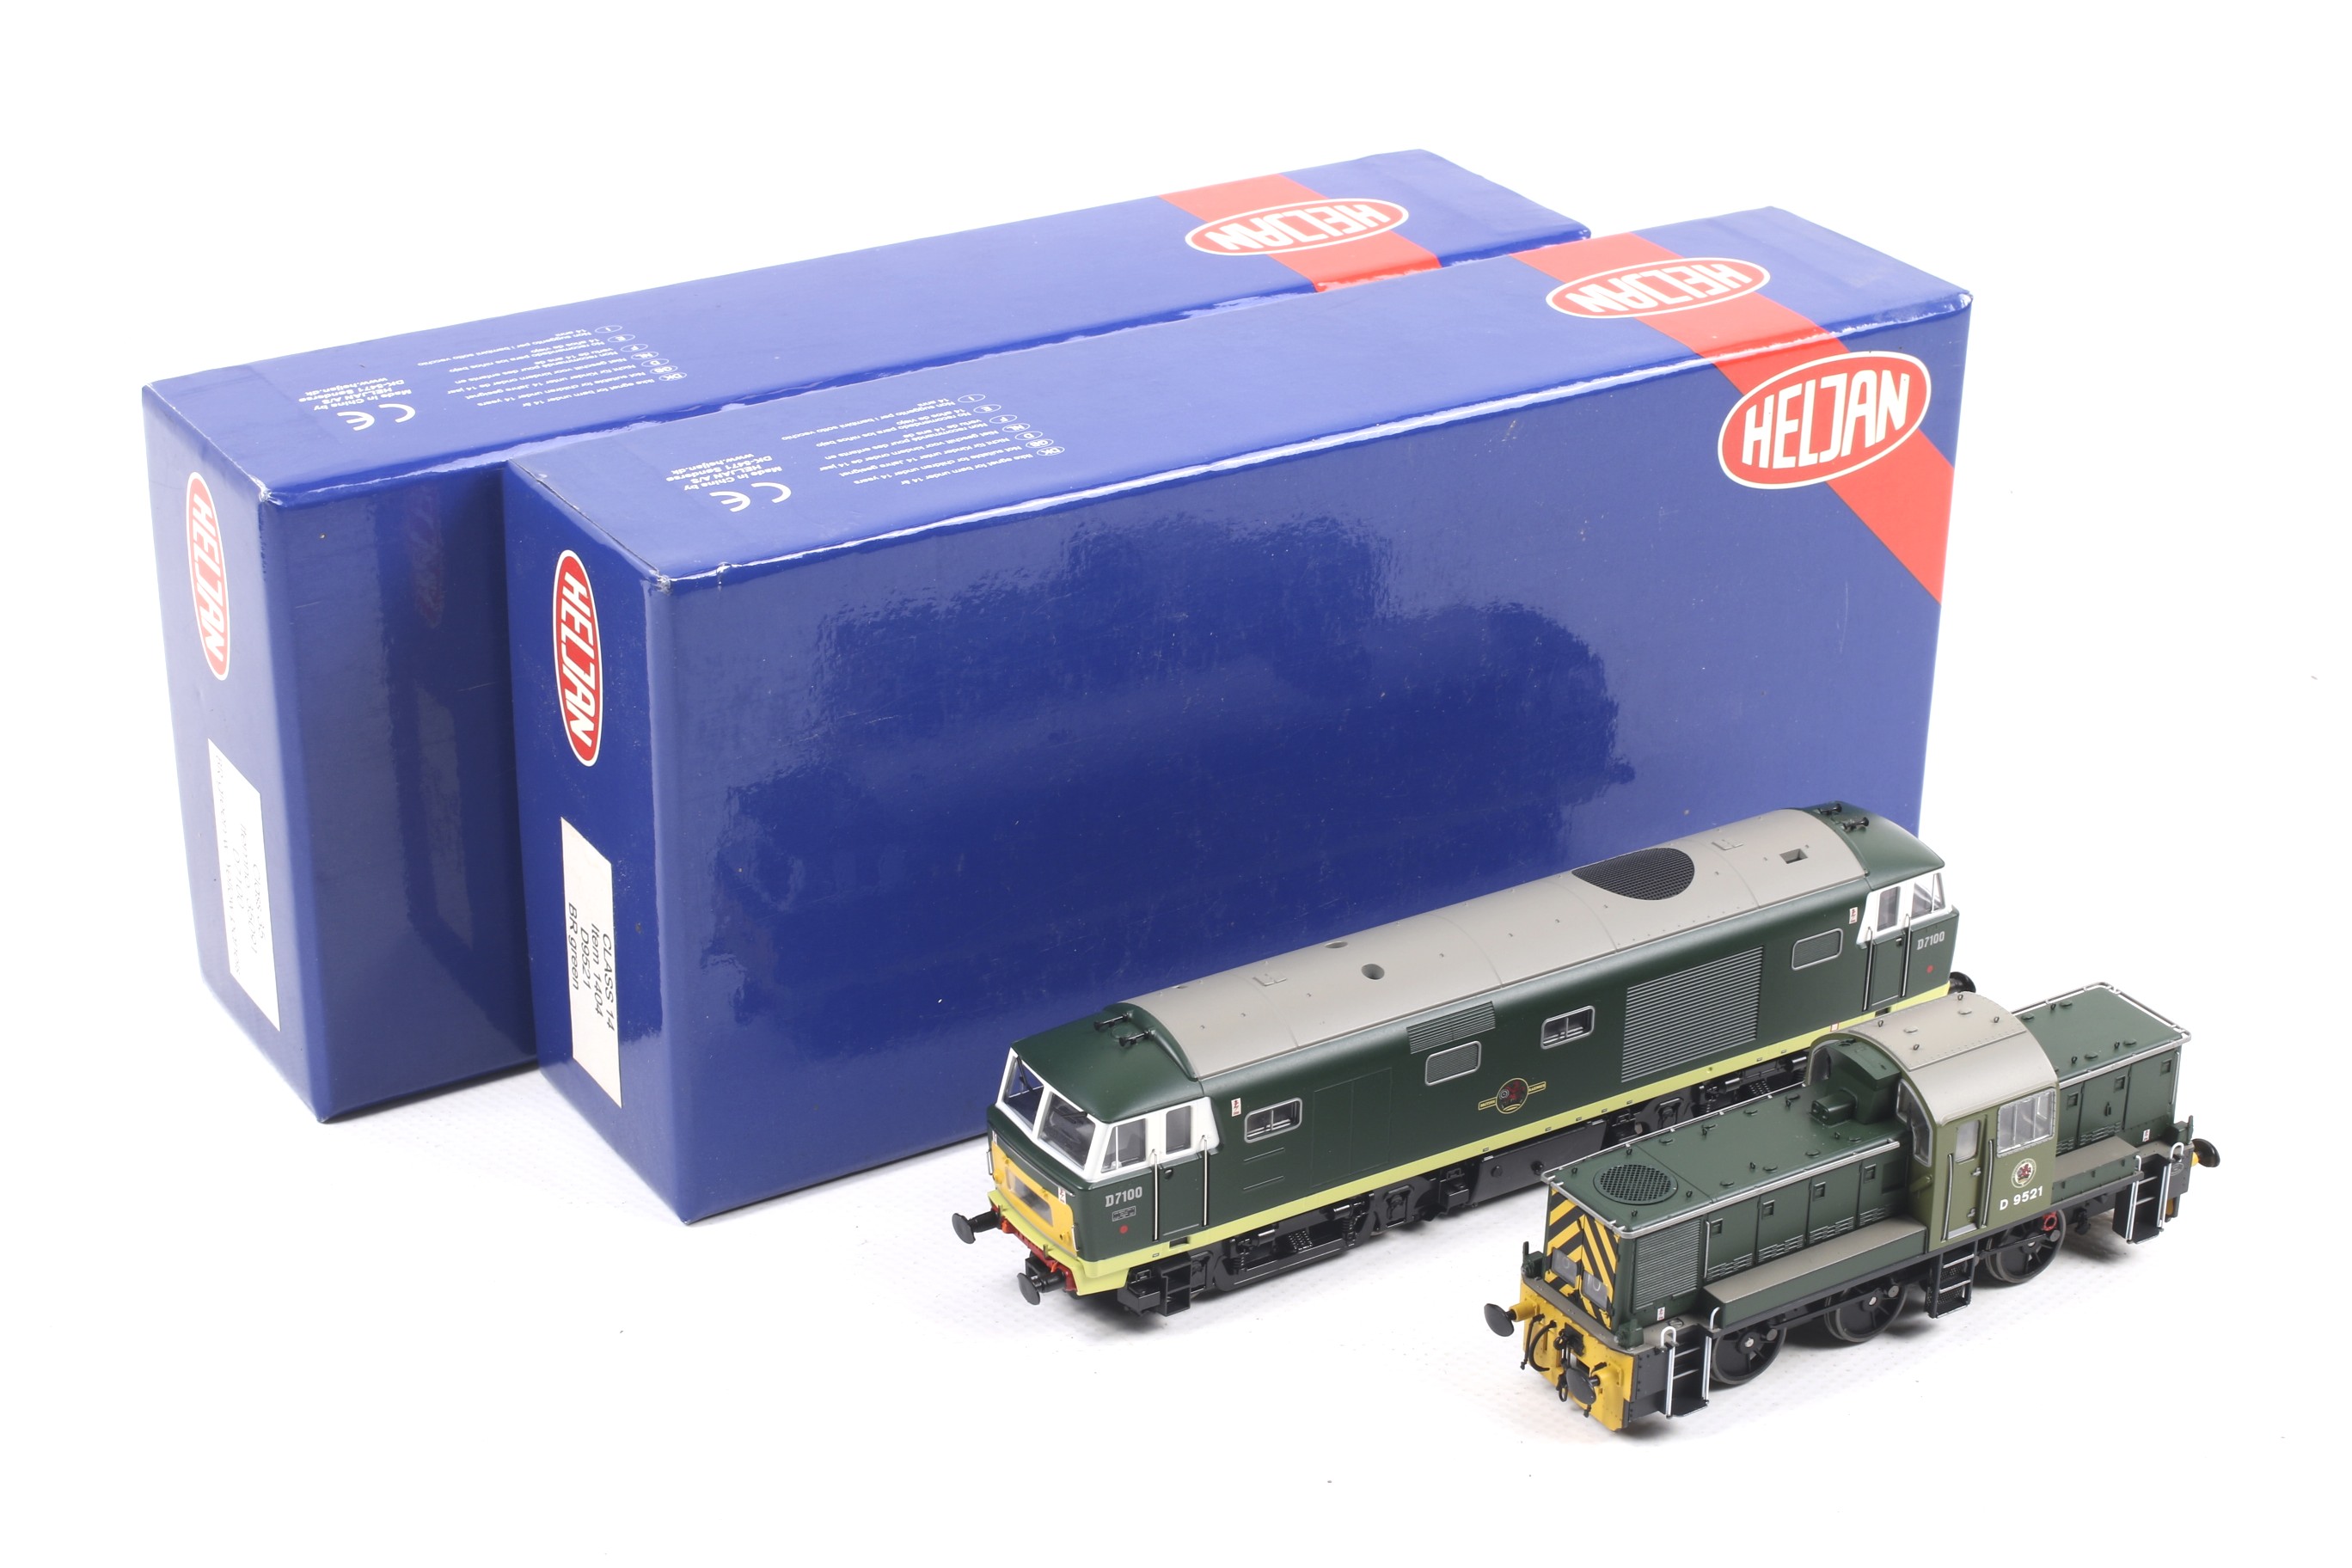 Two Heljan OO gauge diesel locomotives. Comprising one BR class 35 no. D7100 and one BR class 14 no.